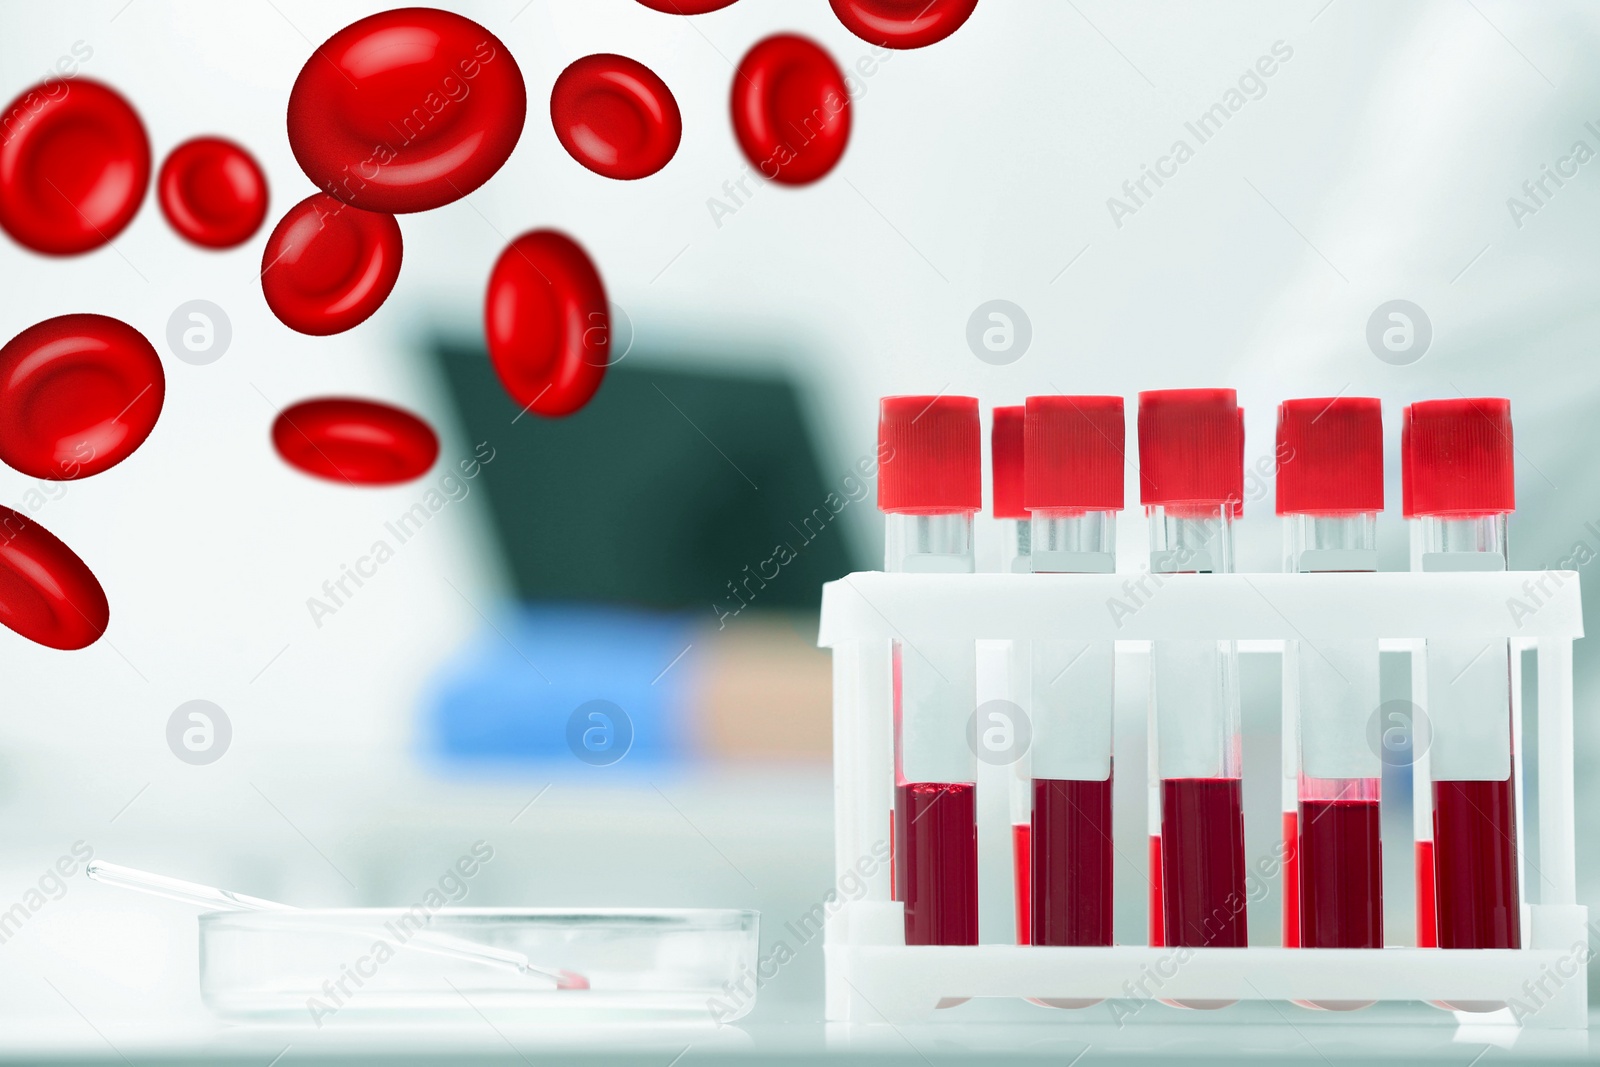 Image of Test tubes with blood samples in laboratory and illustration of erythrocytes